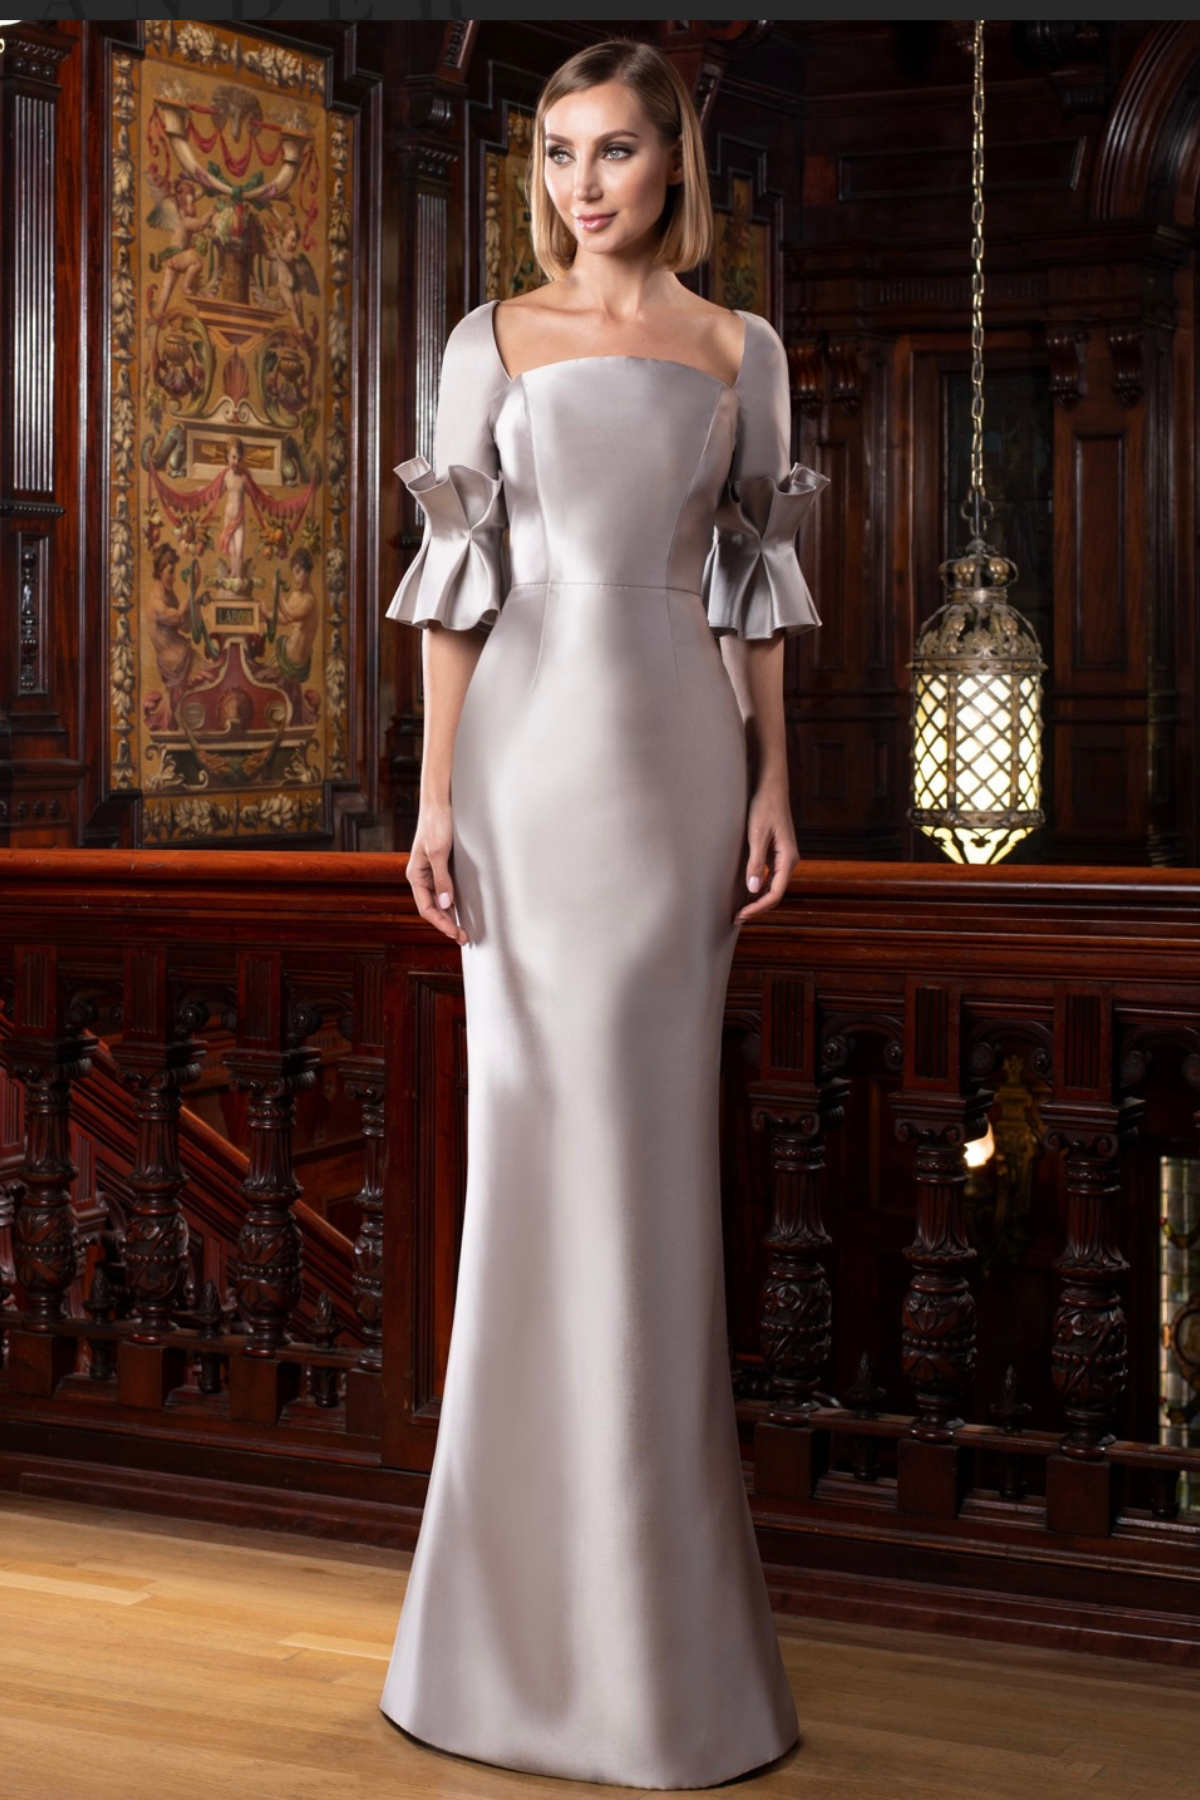 Stunning 3/4 sleeve with Pleated cuff gown – Park Lane Styling